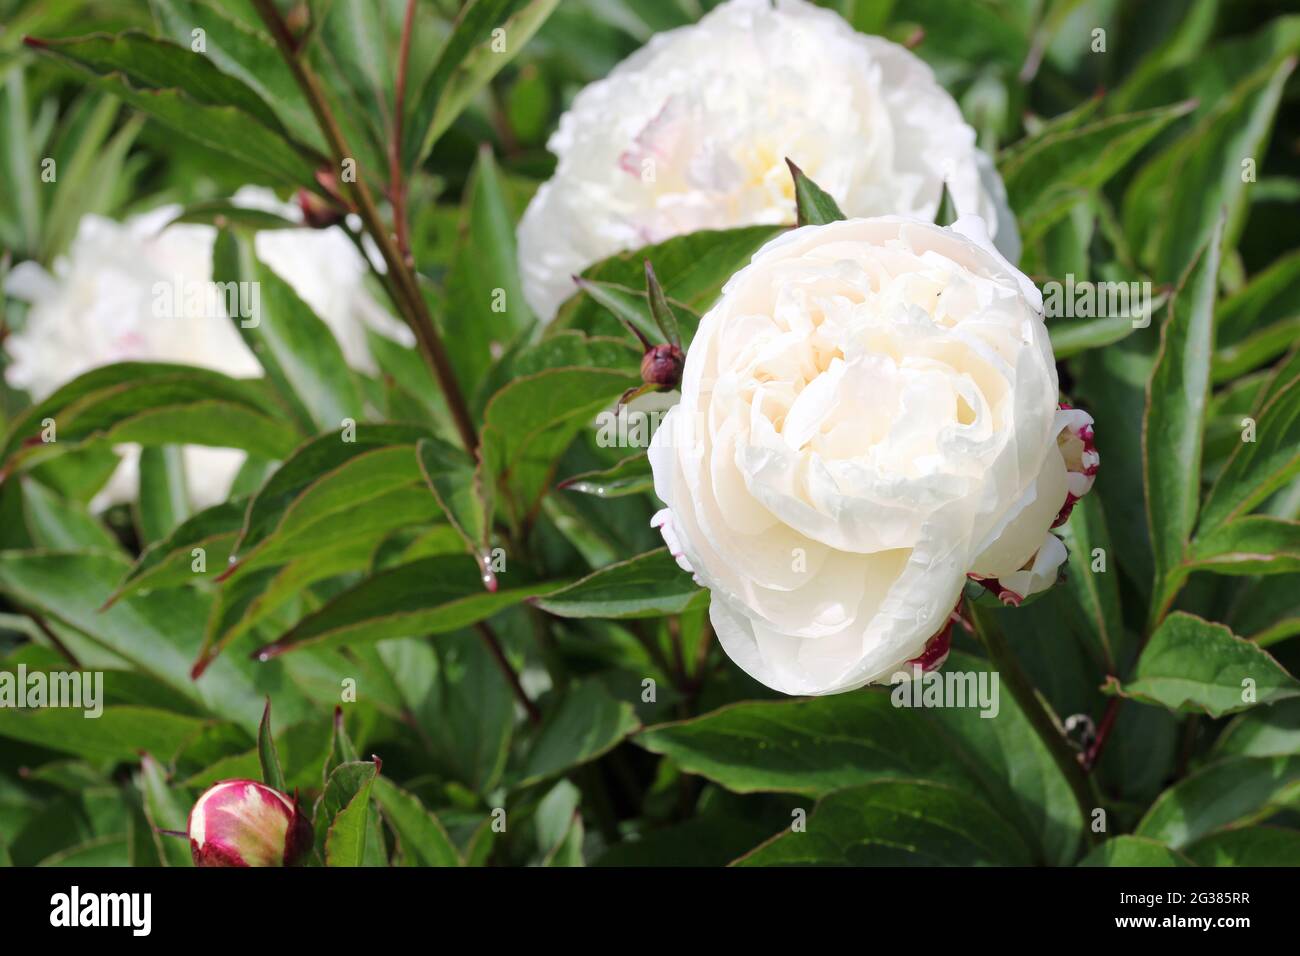 White double peony, Paeonia lactiflora variety Festiva Maxima, flowers with other flowers and buds blurred in the background of leaves. Stock Photo